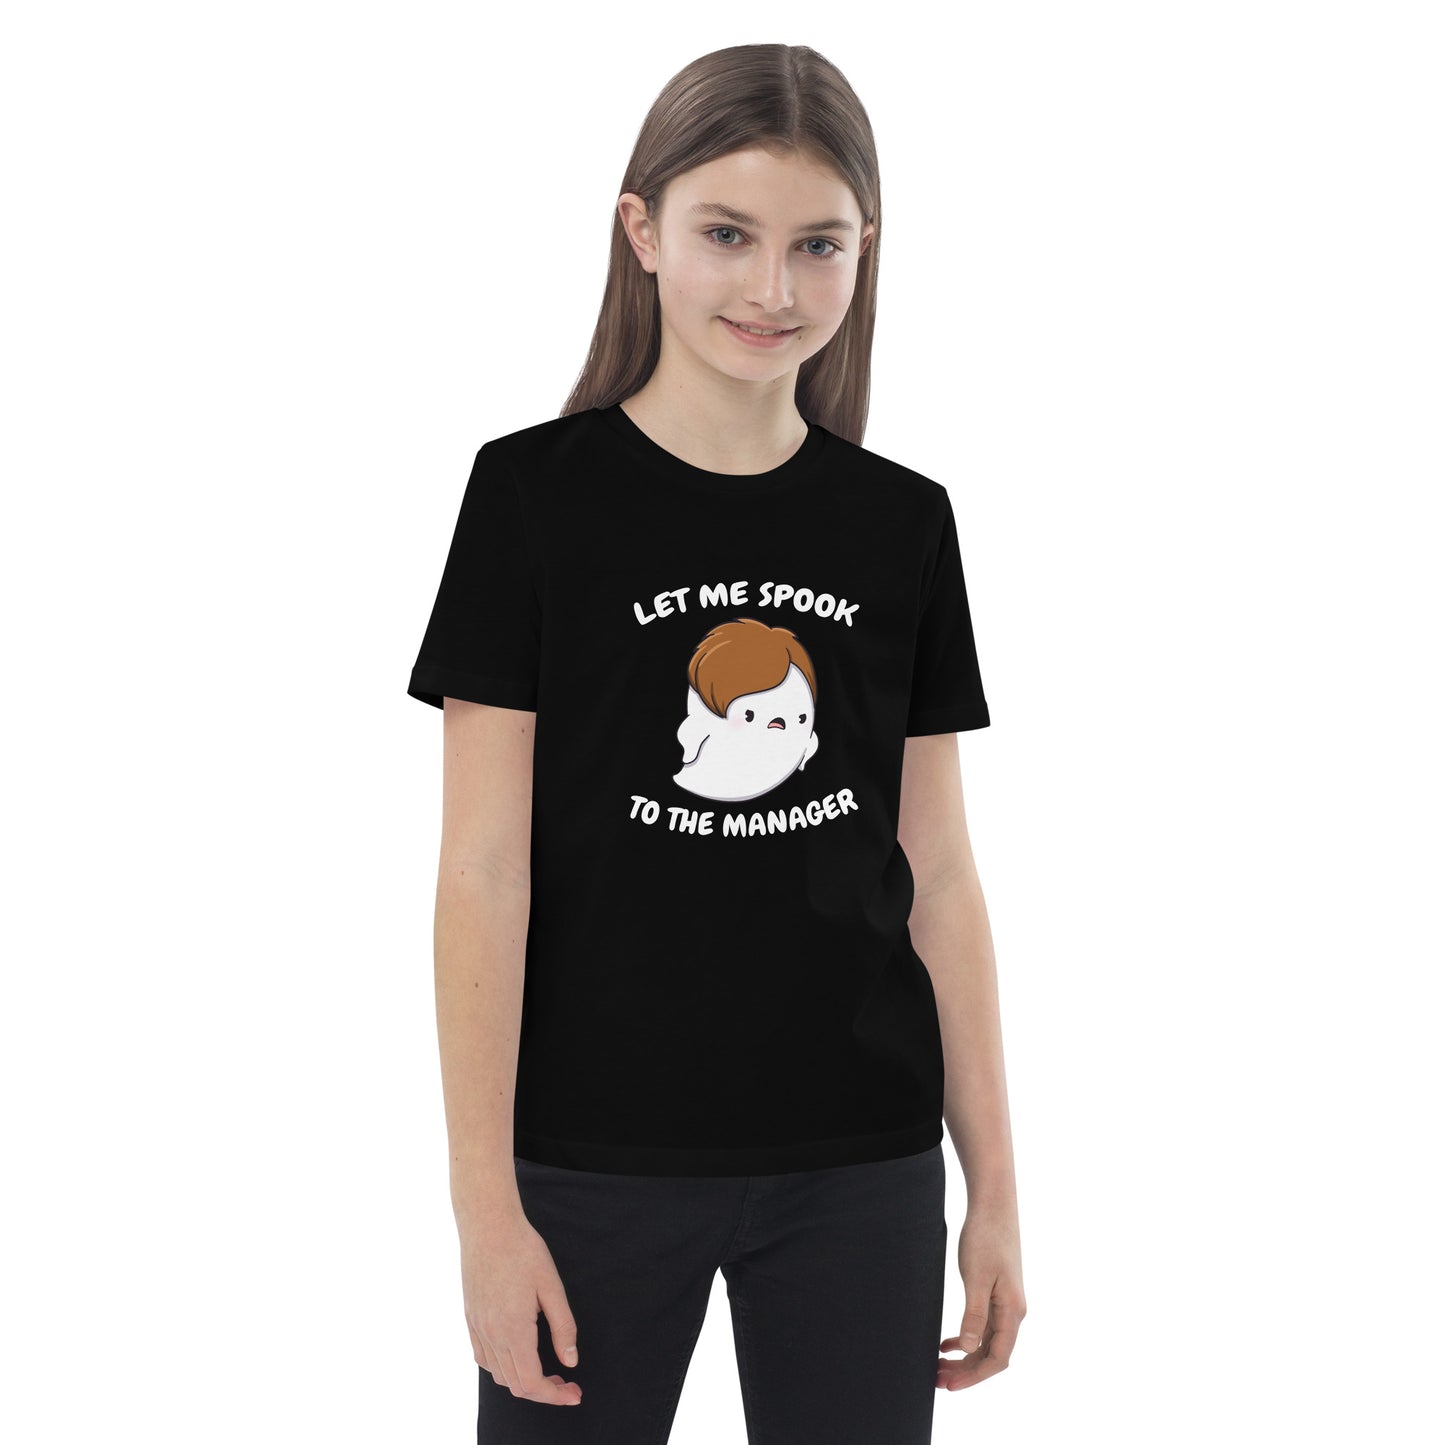 Let me spook to the manager - Organic cotton kids t-shirt